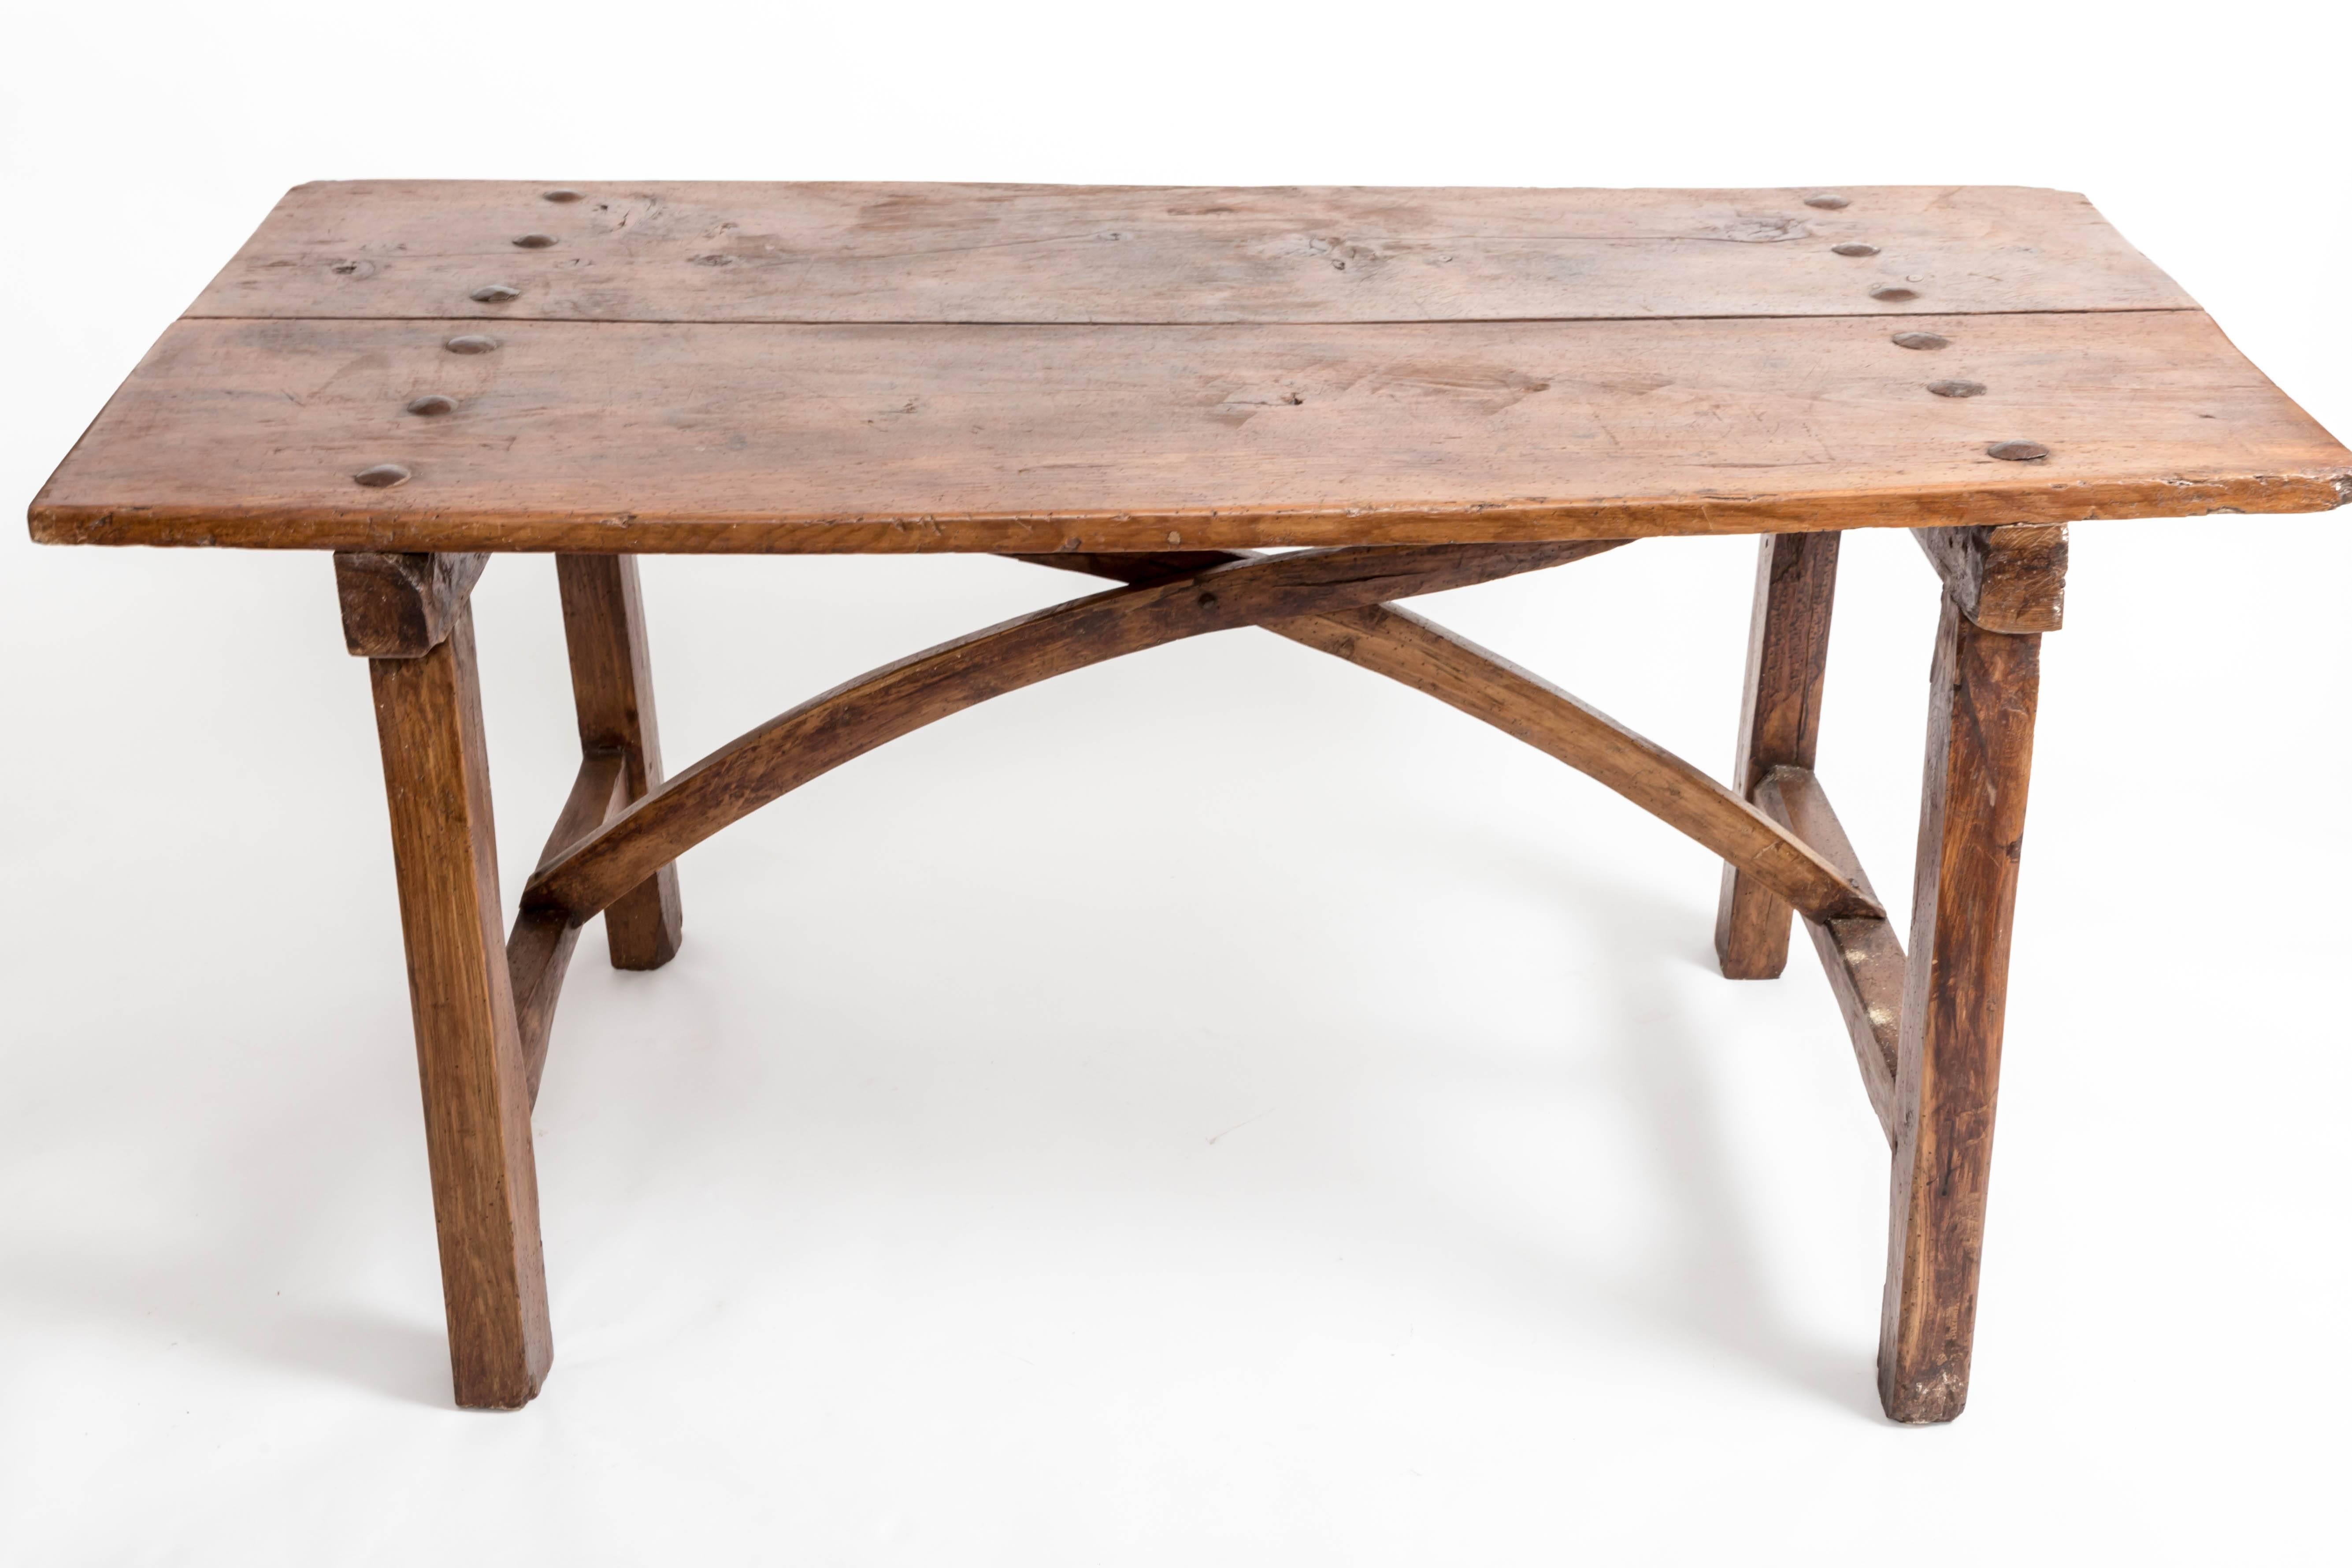 A wonderful aged chestnut farmhouse take with large original blacksmith rivets and a very unusual curved crossed stretcher. Apron height is a comfortable 28.5